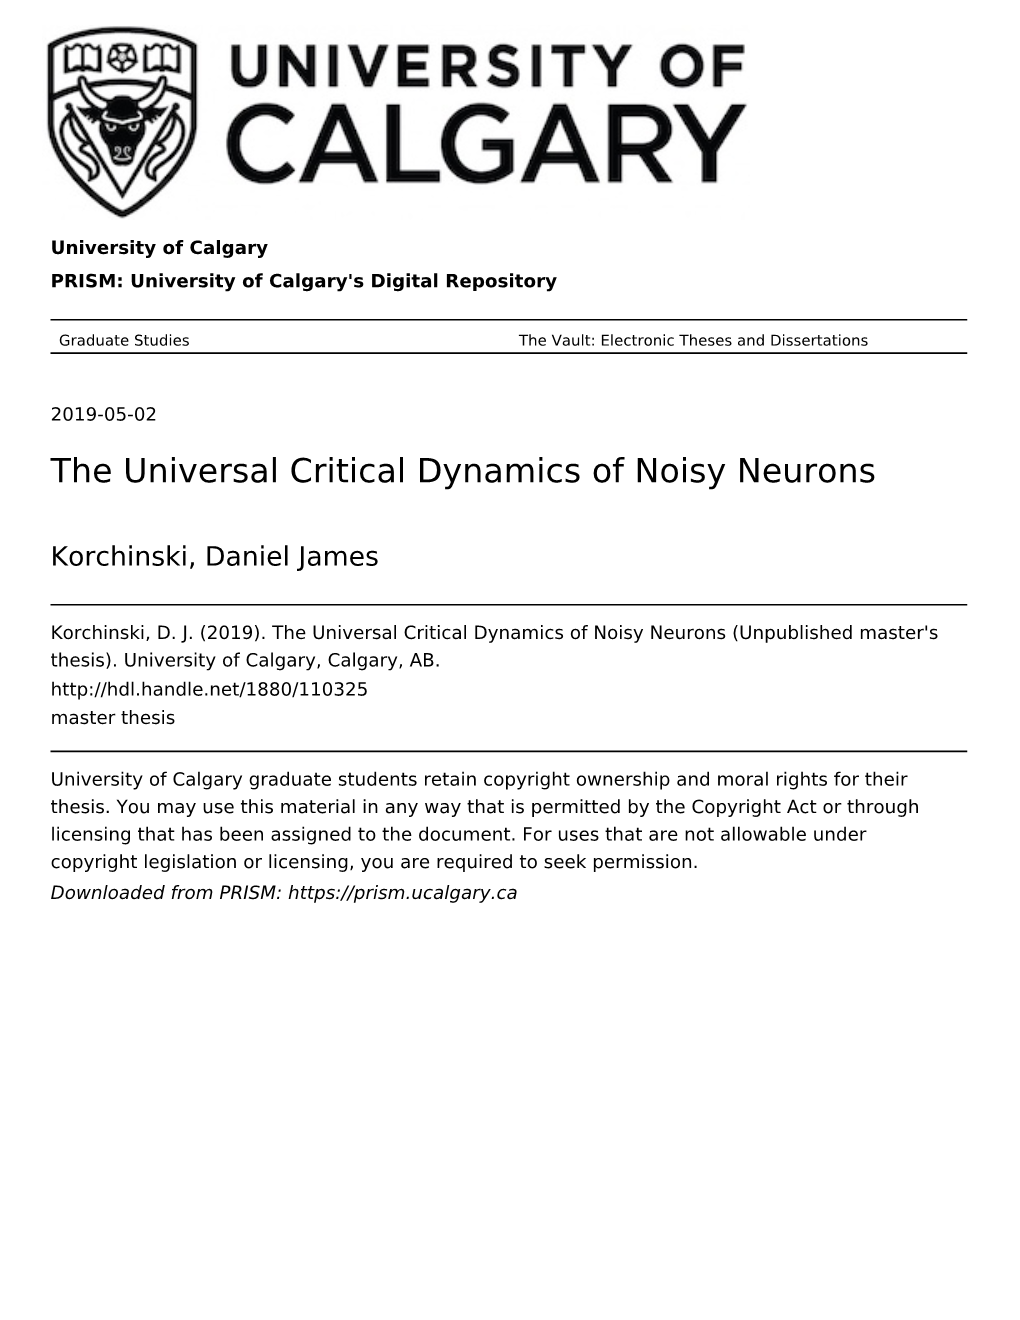 The Universal Critical Dynamics of Noisy Neurons